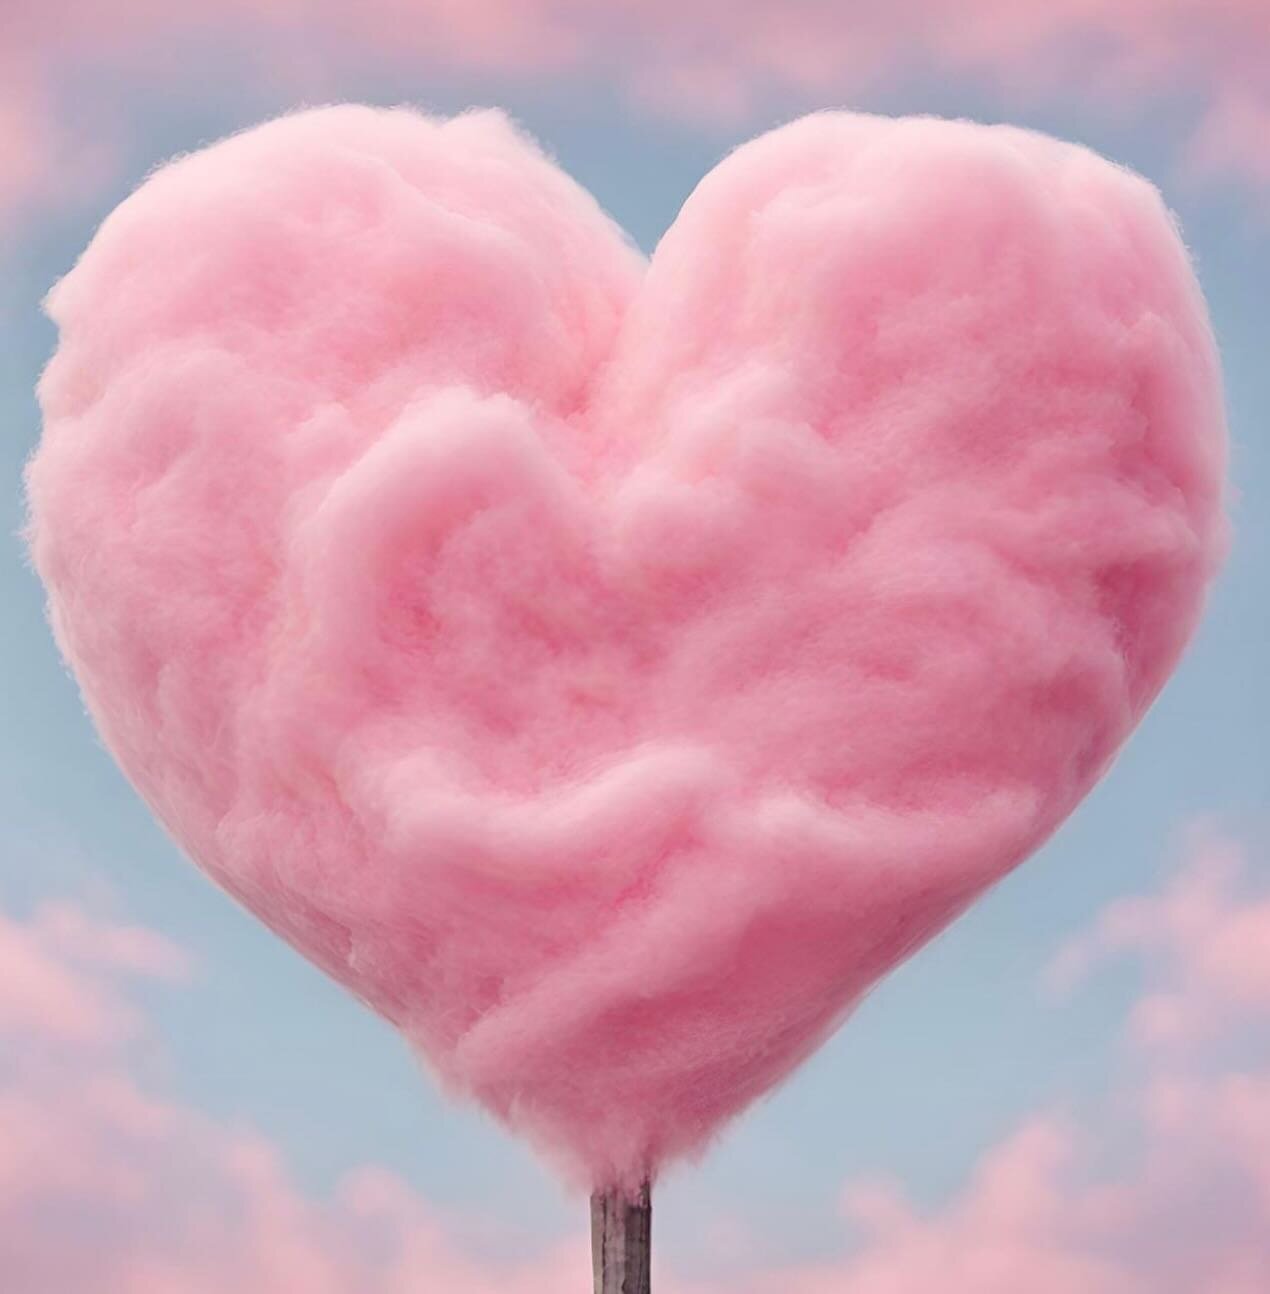 Happy Valentine&rsquo;s Day, cotton candy lovers!